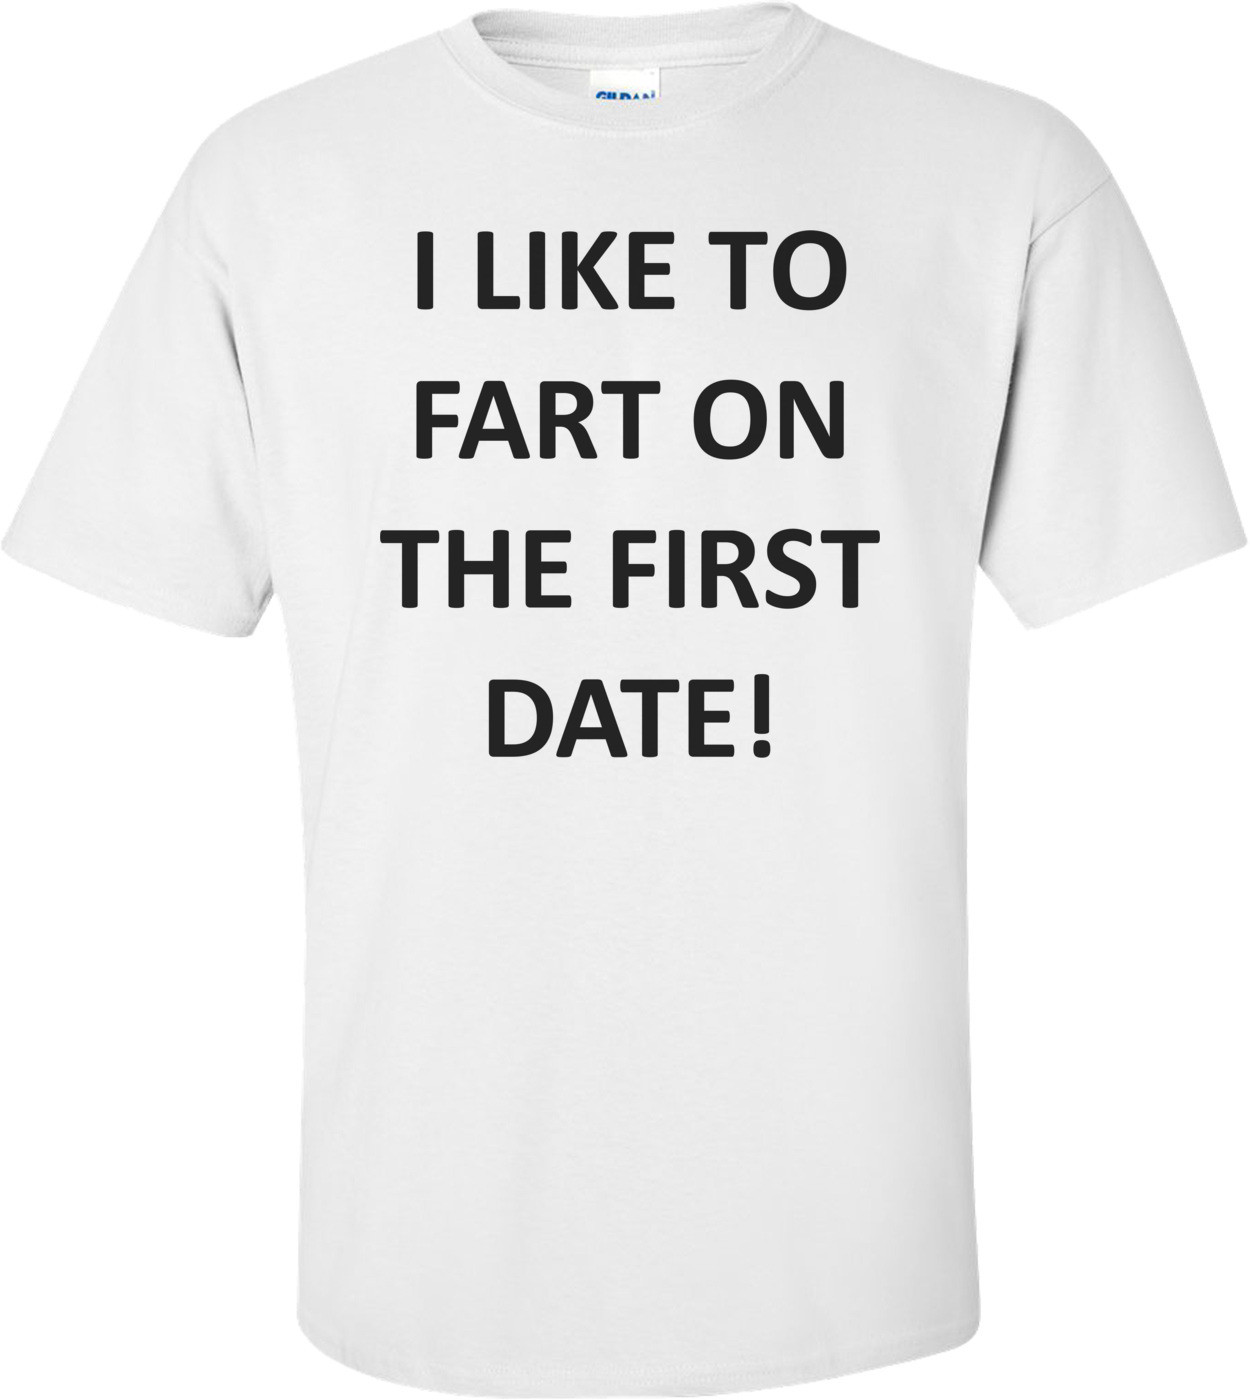 I LIKE TO FART ON THE FIRST DATE!